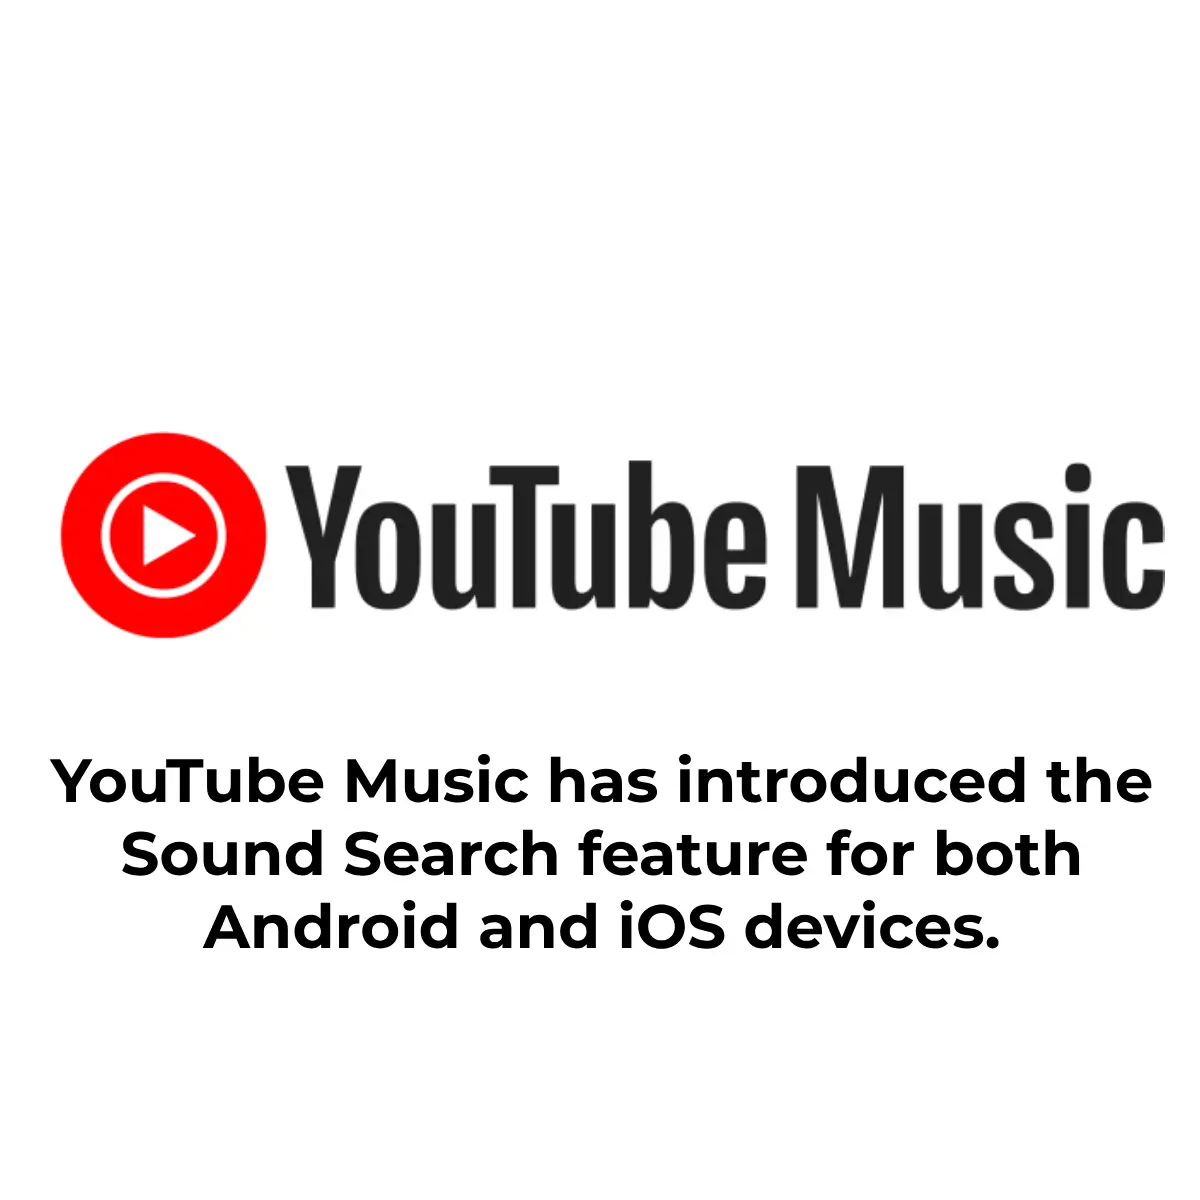 YouTube Music has introduced the Sound Search feature for both Android and iOS devices.